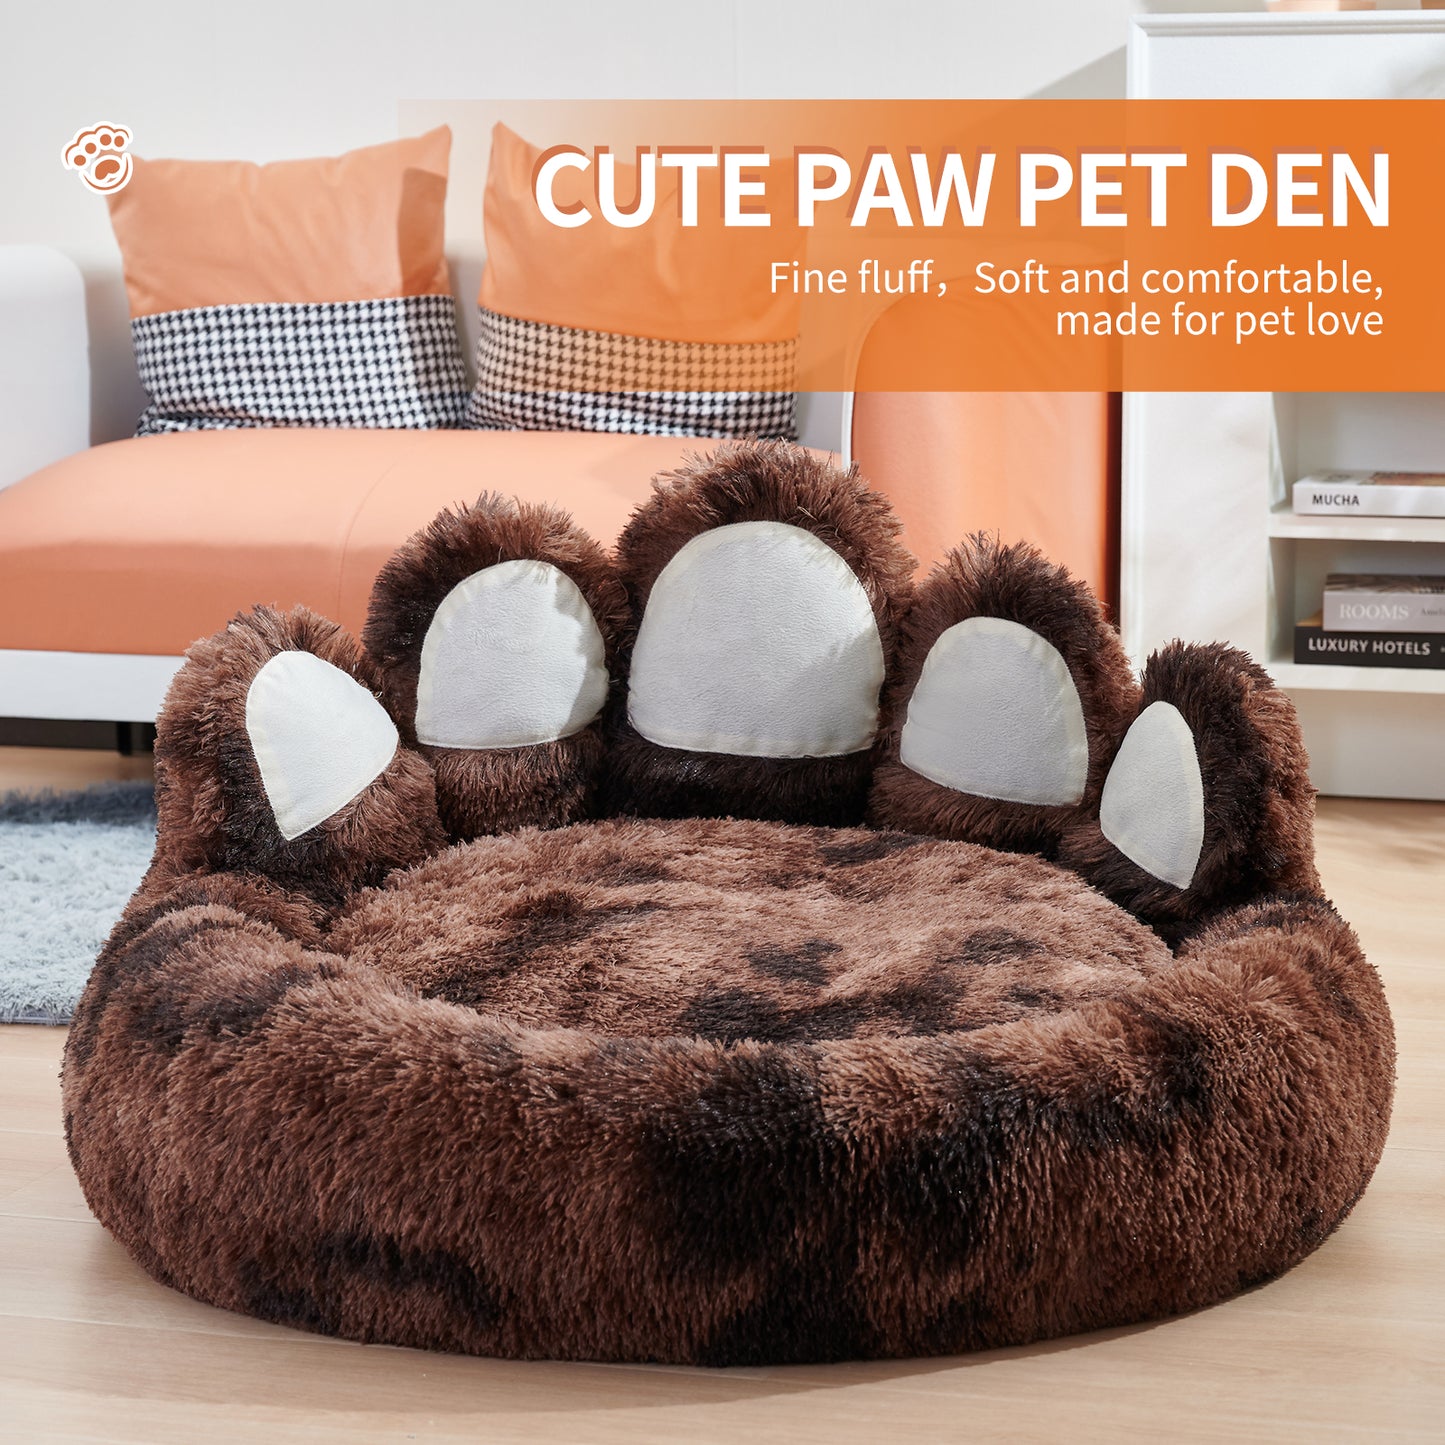 Thickened Warm Kennel For Pets With Bear Paw Shape House - Teddy Kennel With Removable Washable Cat Fluffy Dog Bed Mat For Deep Sleeping - Keeping Warm